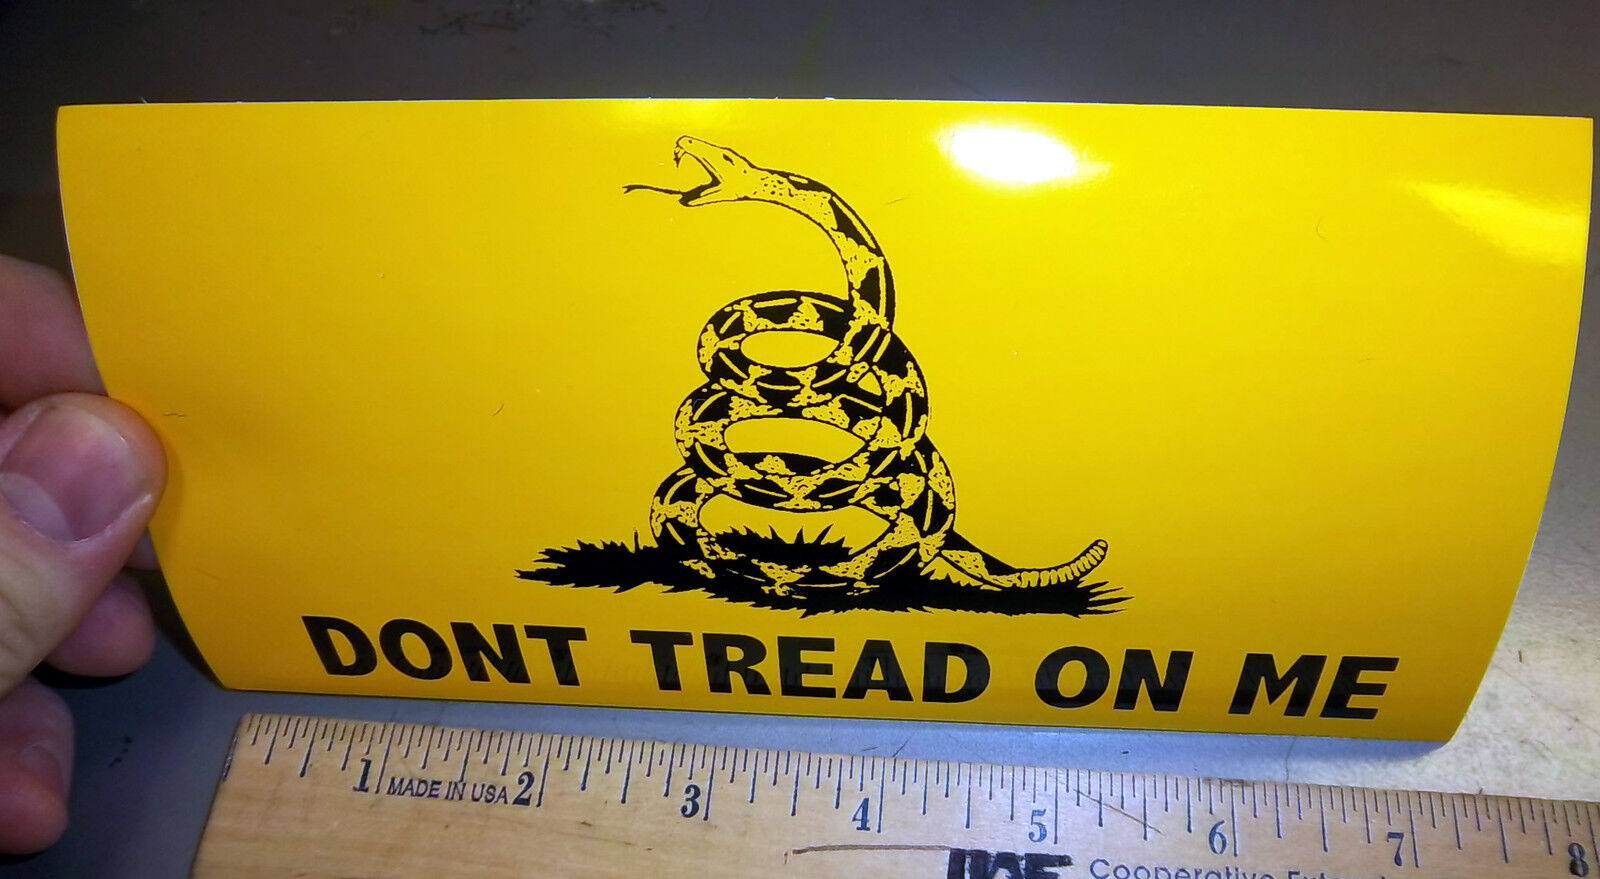 Dont Tread on Me Bumper Sticker measures approx 7.5 x 3.5 inch - Ships Worldwide